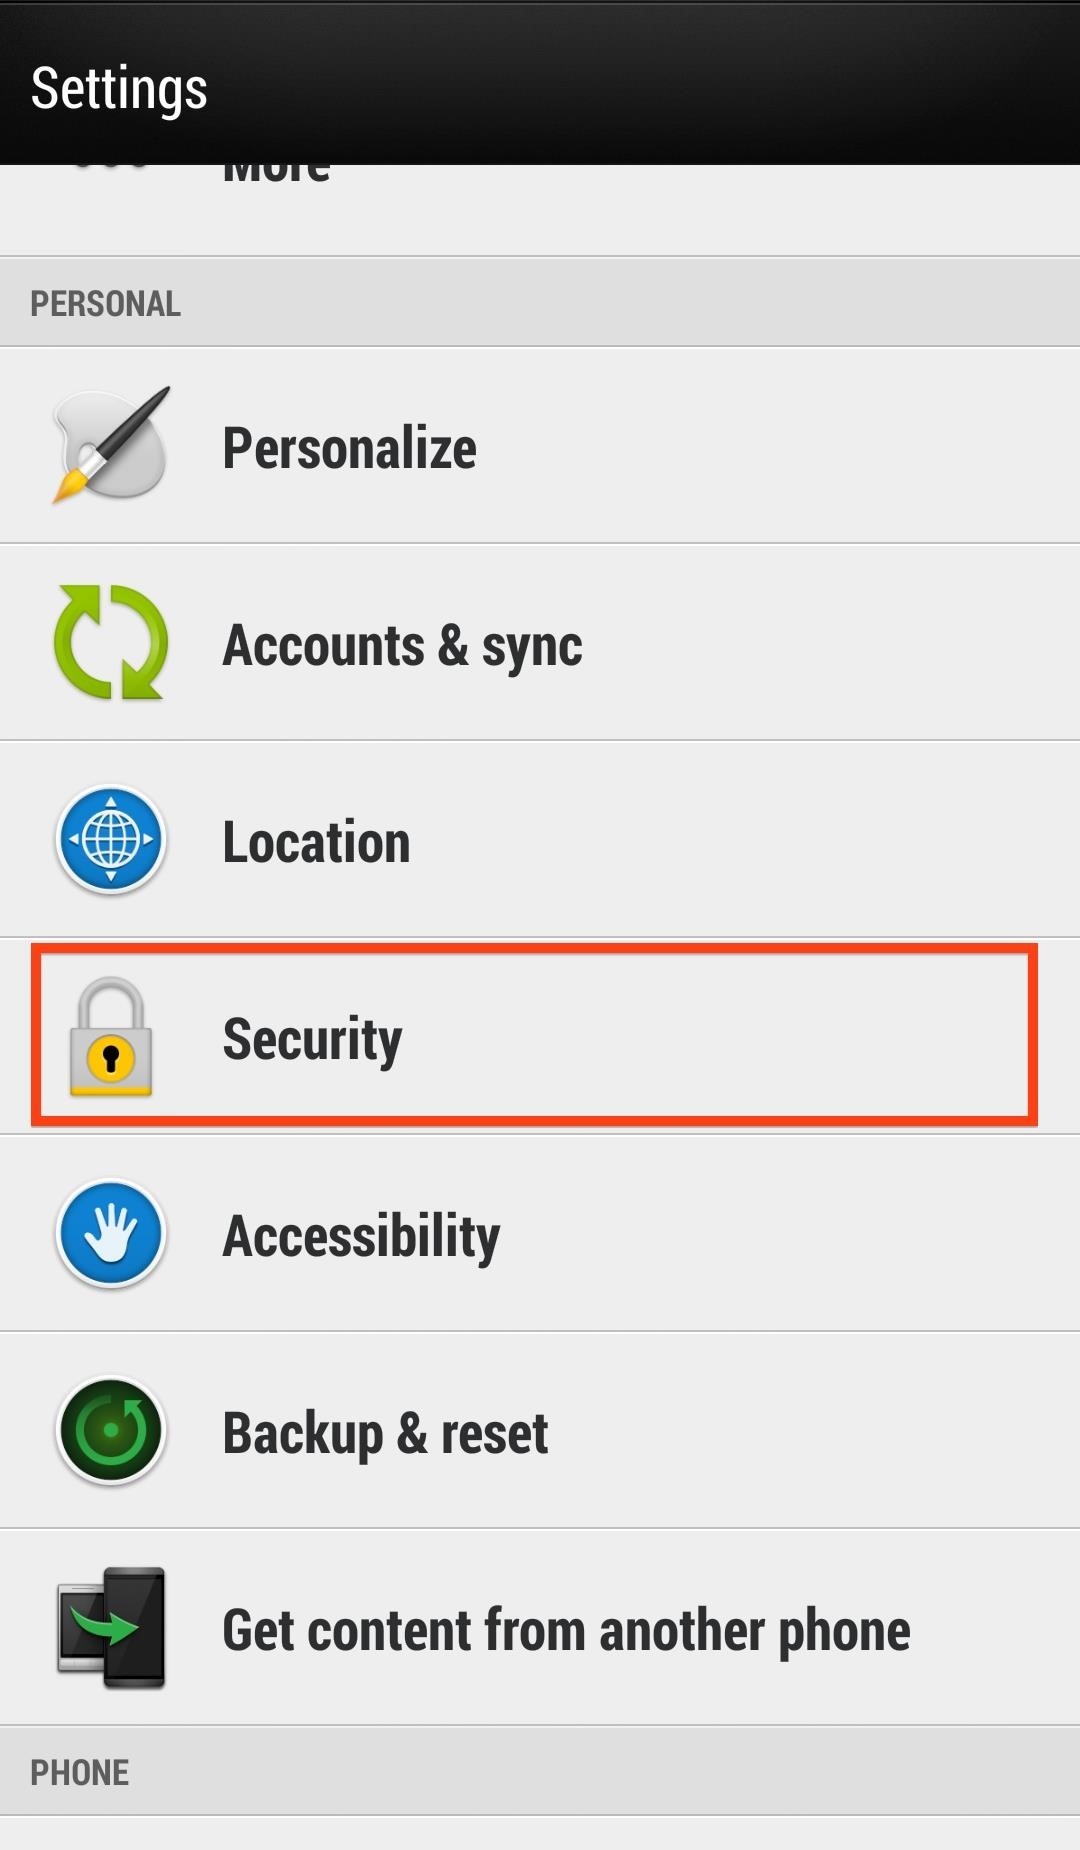 How to Set Your HTC One to S-OFF Using Firewater on Any Computer